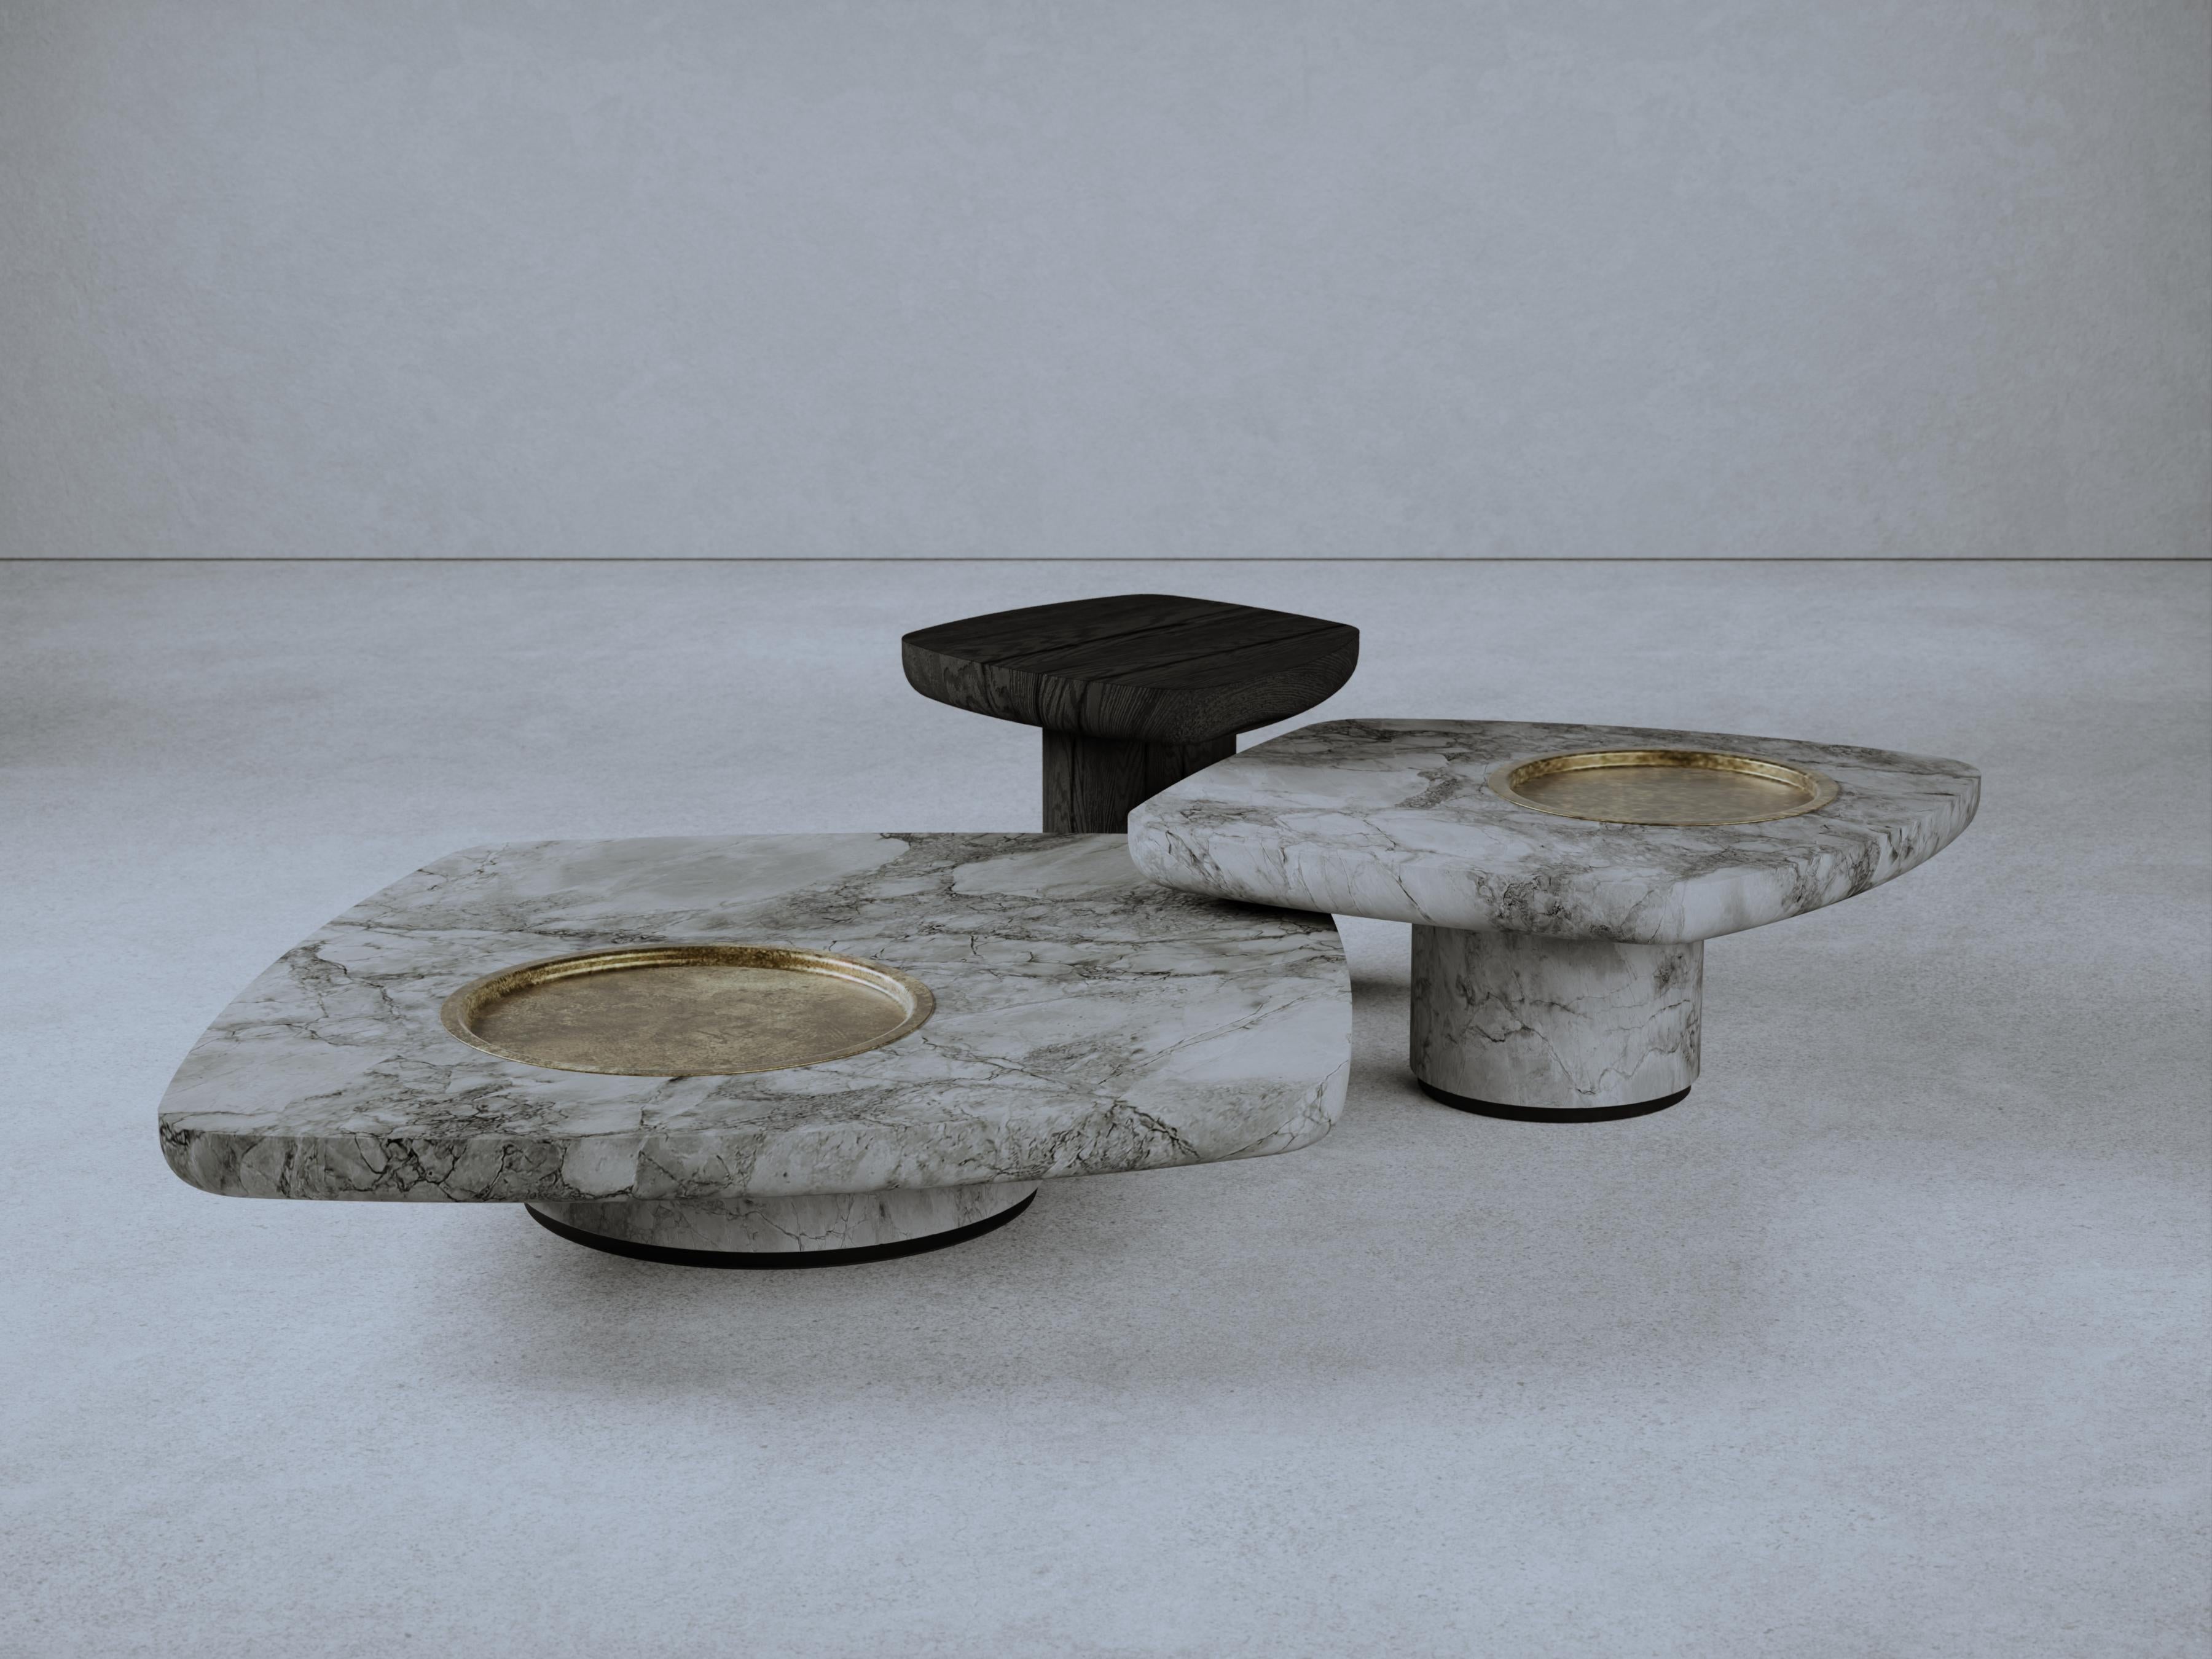 Set of 3 Blackbird Coffee Tables by Gio Pagani
Dimensions: High: D 50 x W 50 x H 46 cm.
Mid: D 77 x W 83 x H 36 cm.
Low: D 120 x W 127 x H 26 cm.
Materials: Fir wood, superwhite marble and raw brass metal.

In a fluid society capable of mixing